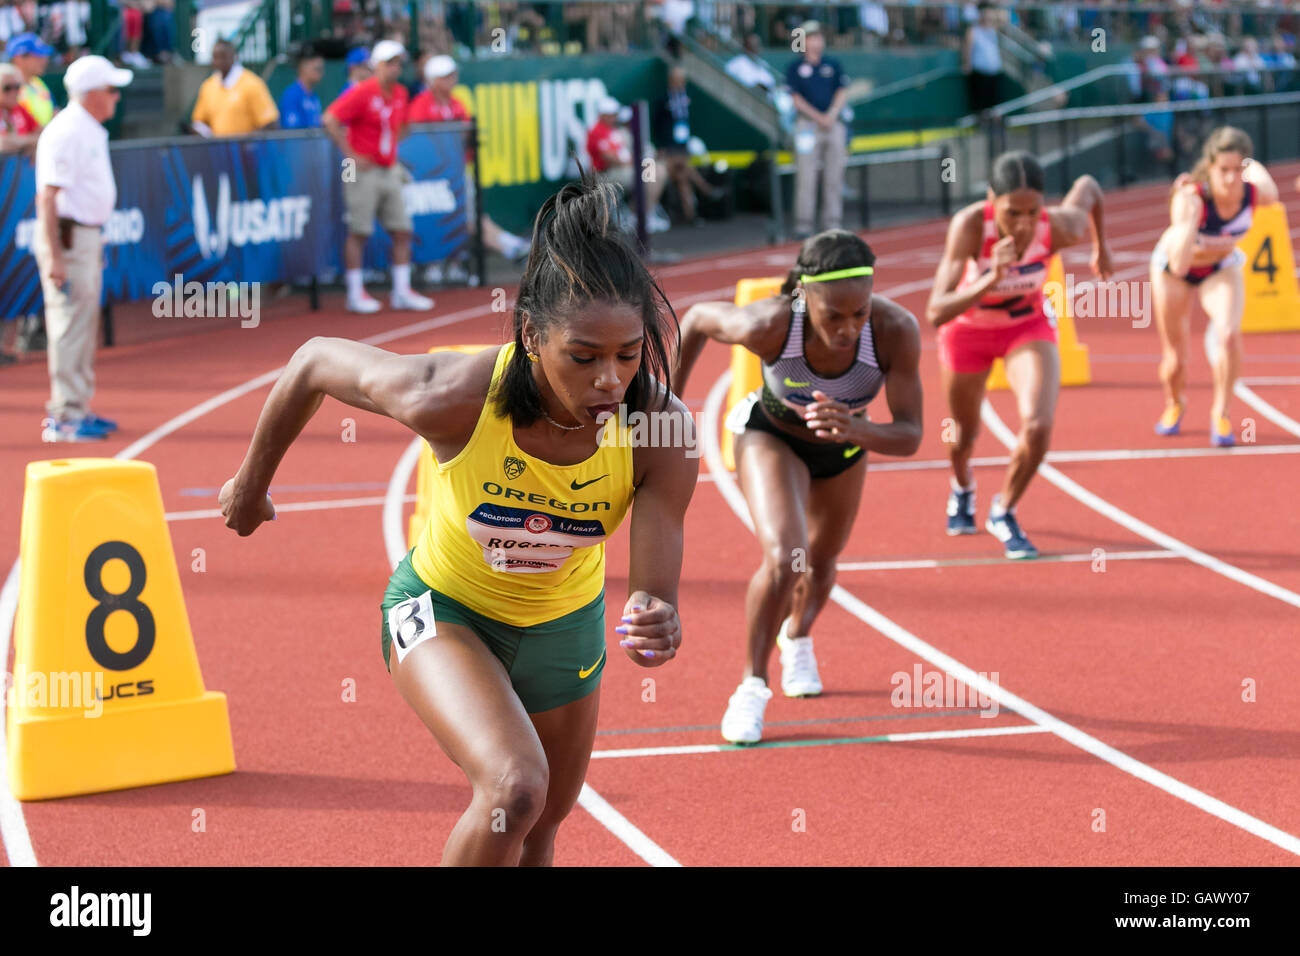 Eugene, USA. 4th July, 2016. Start of the Women's 800m Final at the 2016 USATF Olympic Trials at Historic Hayward Field in Eugene, Oregon, USA. Credit:  Joshua Rainey/Alamy Live News. Stock Photo